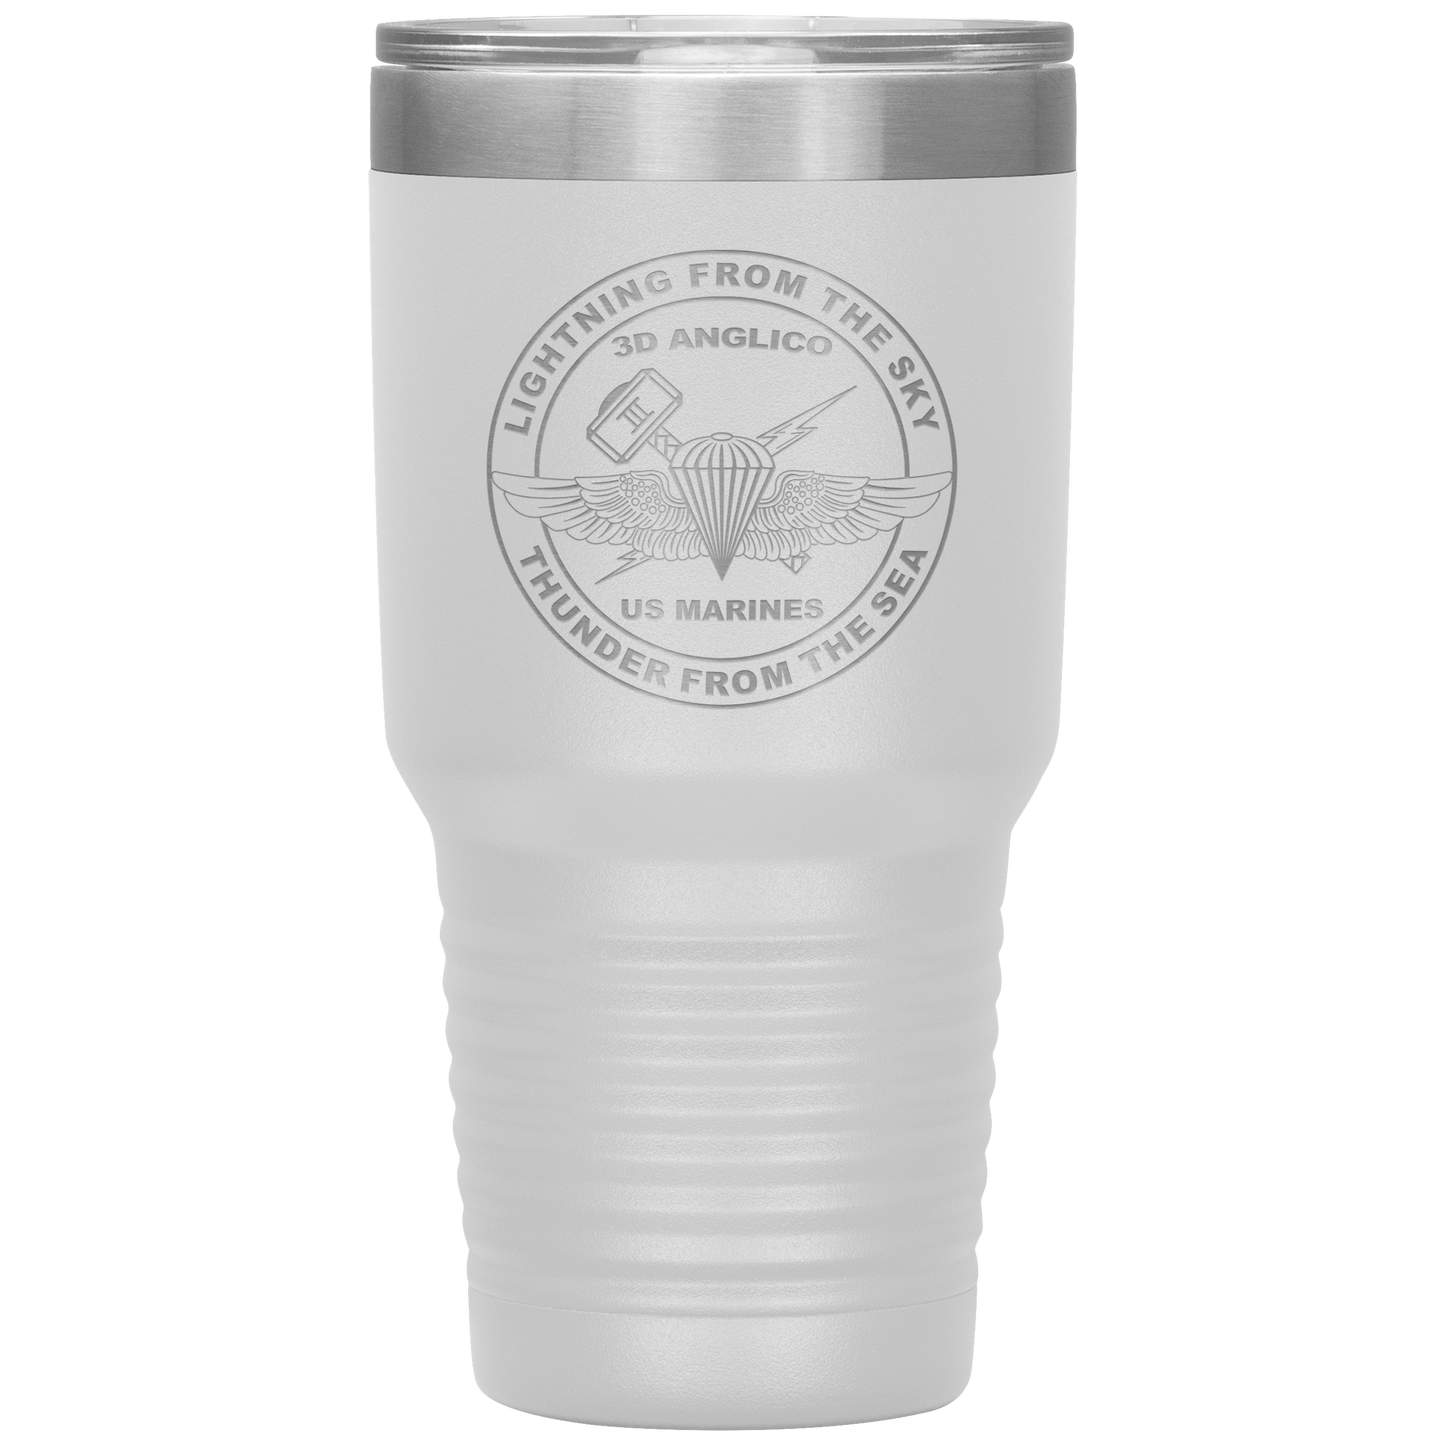 3D ANGLICO Crest Tumbler